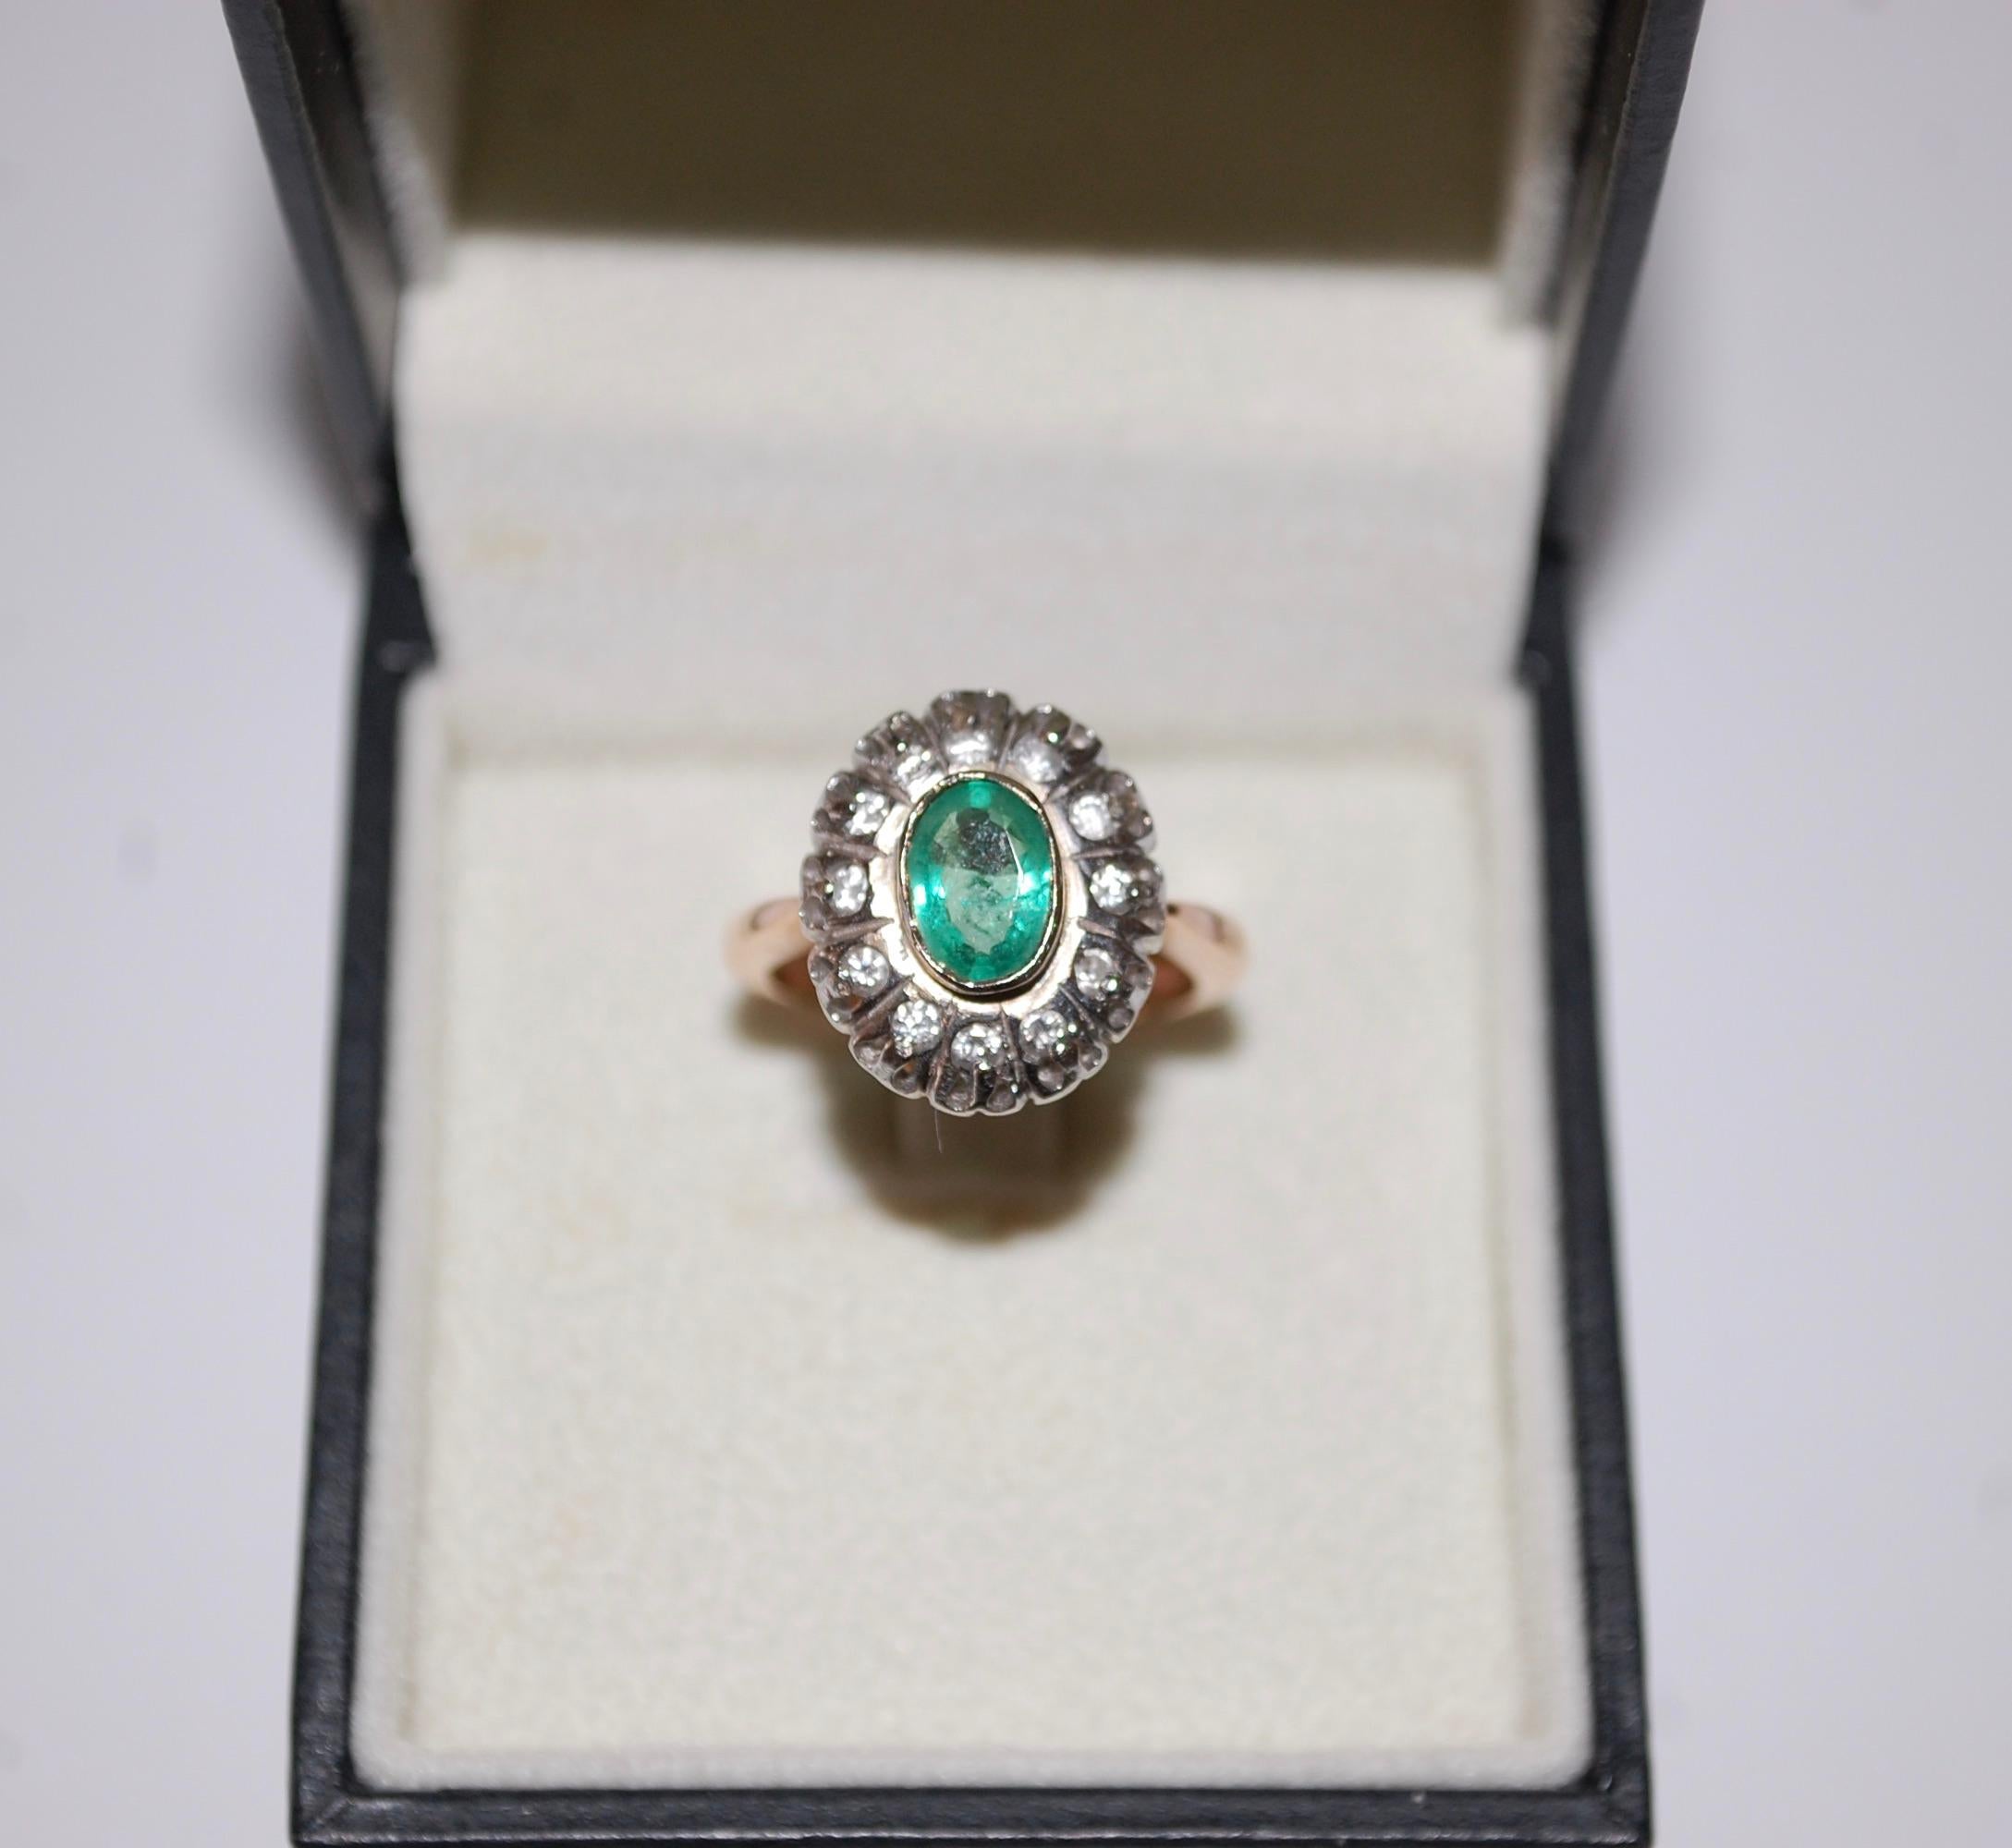 Antique European Emerald and Diamond Earrings and Ring Set
Rare Antique European Edwardian style Halo earrings and ring set. 14k rose and white gold (stamp 585). Oval light green natural emerald no visible inclusions or evidence of dye, about 8mm x